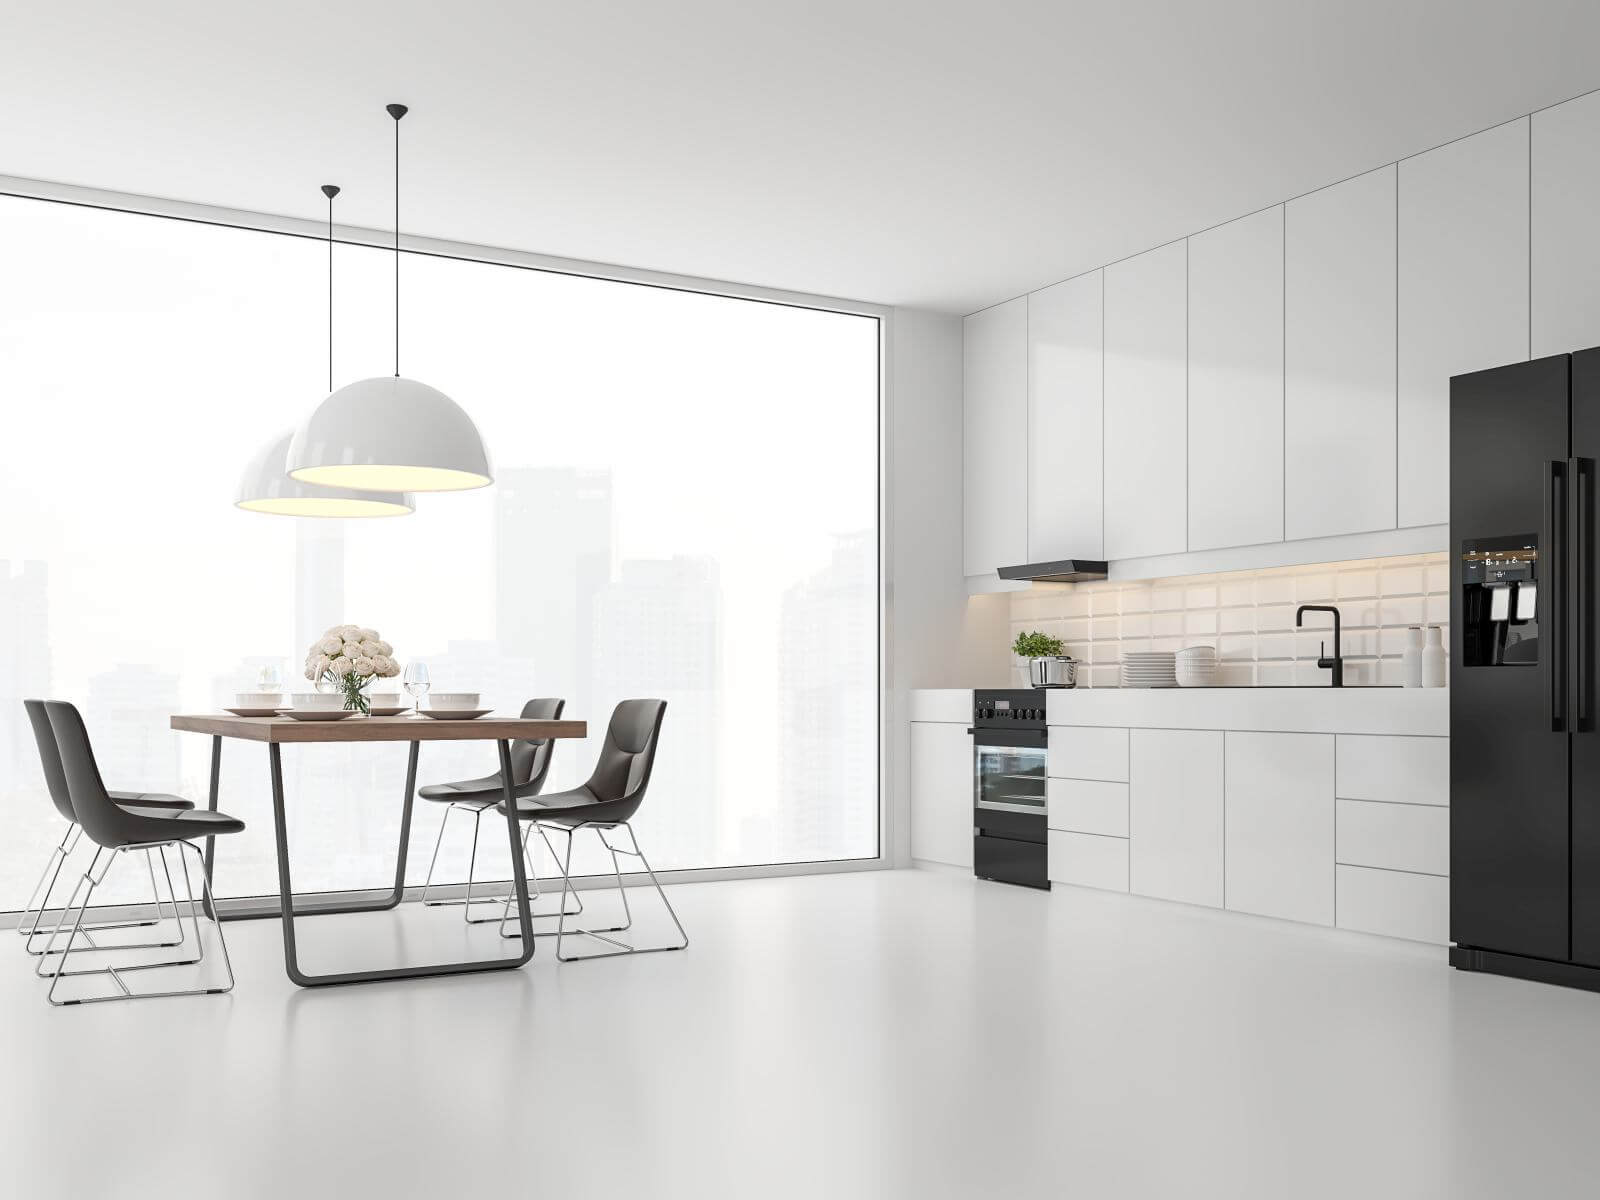 Minimal style kitchen and dining room 3d render.There are white floor and wall, Glossy white cabinet doors,Dark brown leather chair,The room has large windows. lookink out to the city view.